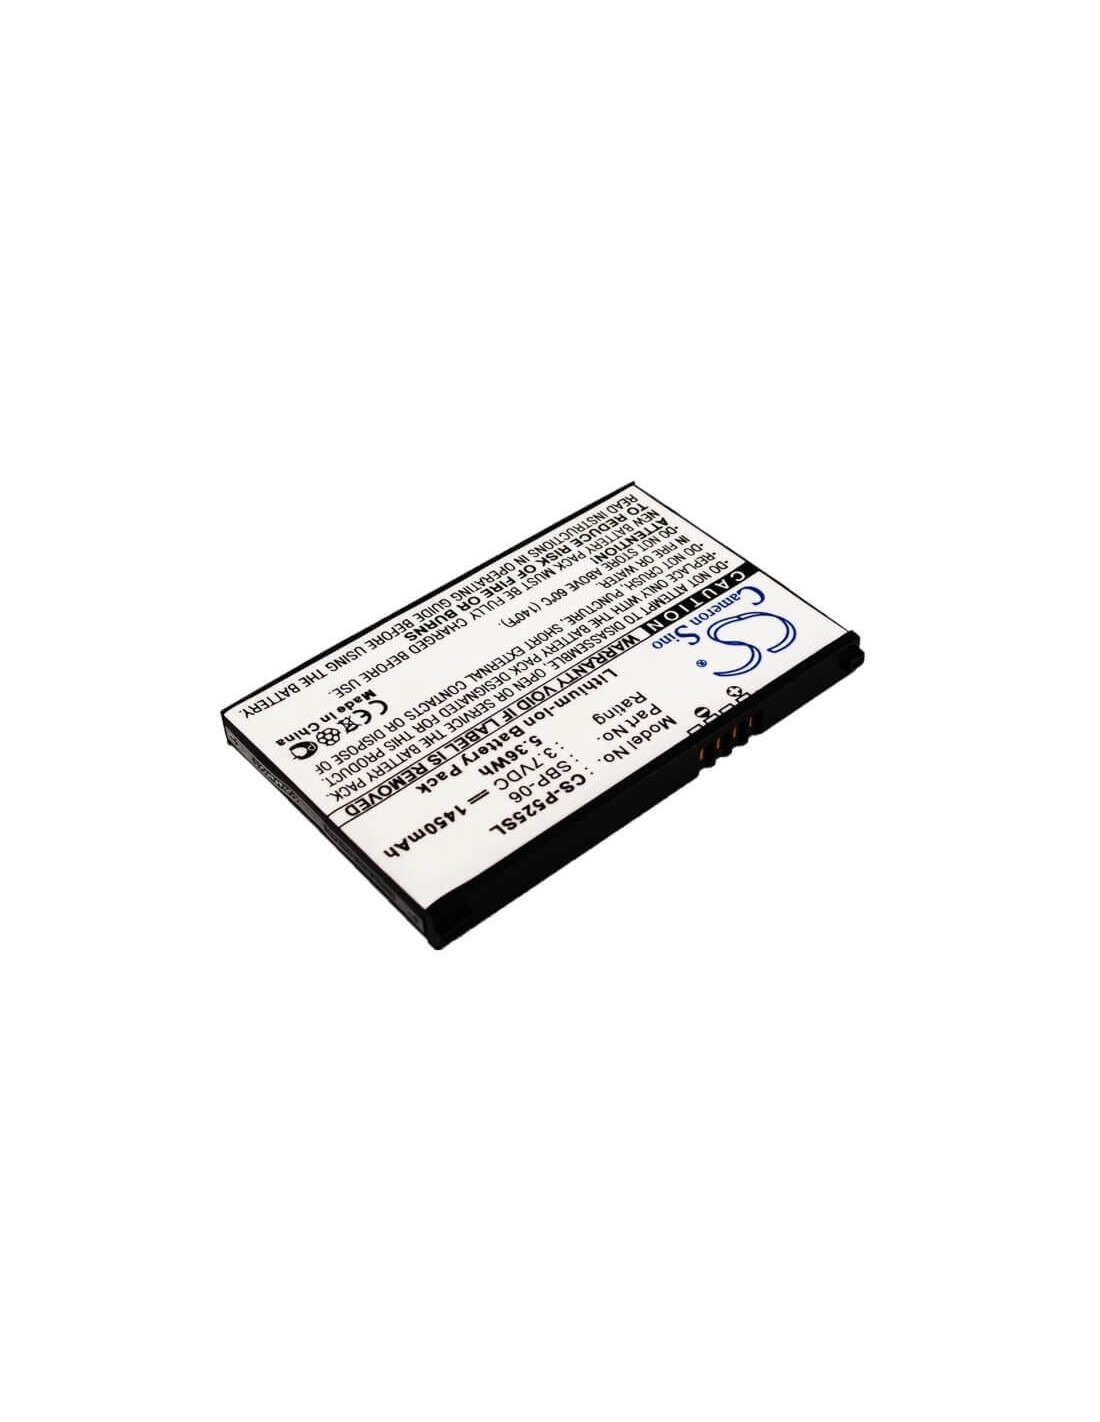 Battery for Asus P525, P526, P527 3.7V, 1450mAh - 5.37Wh